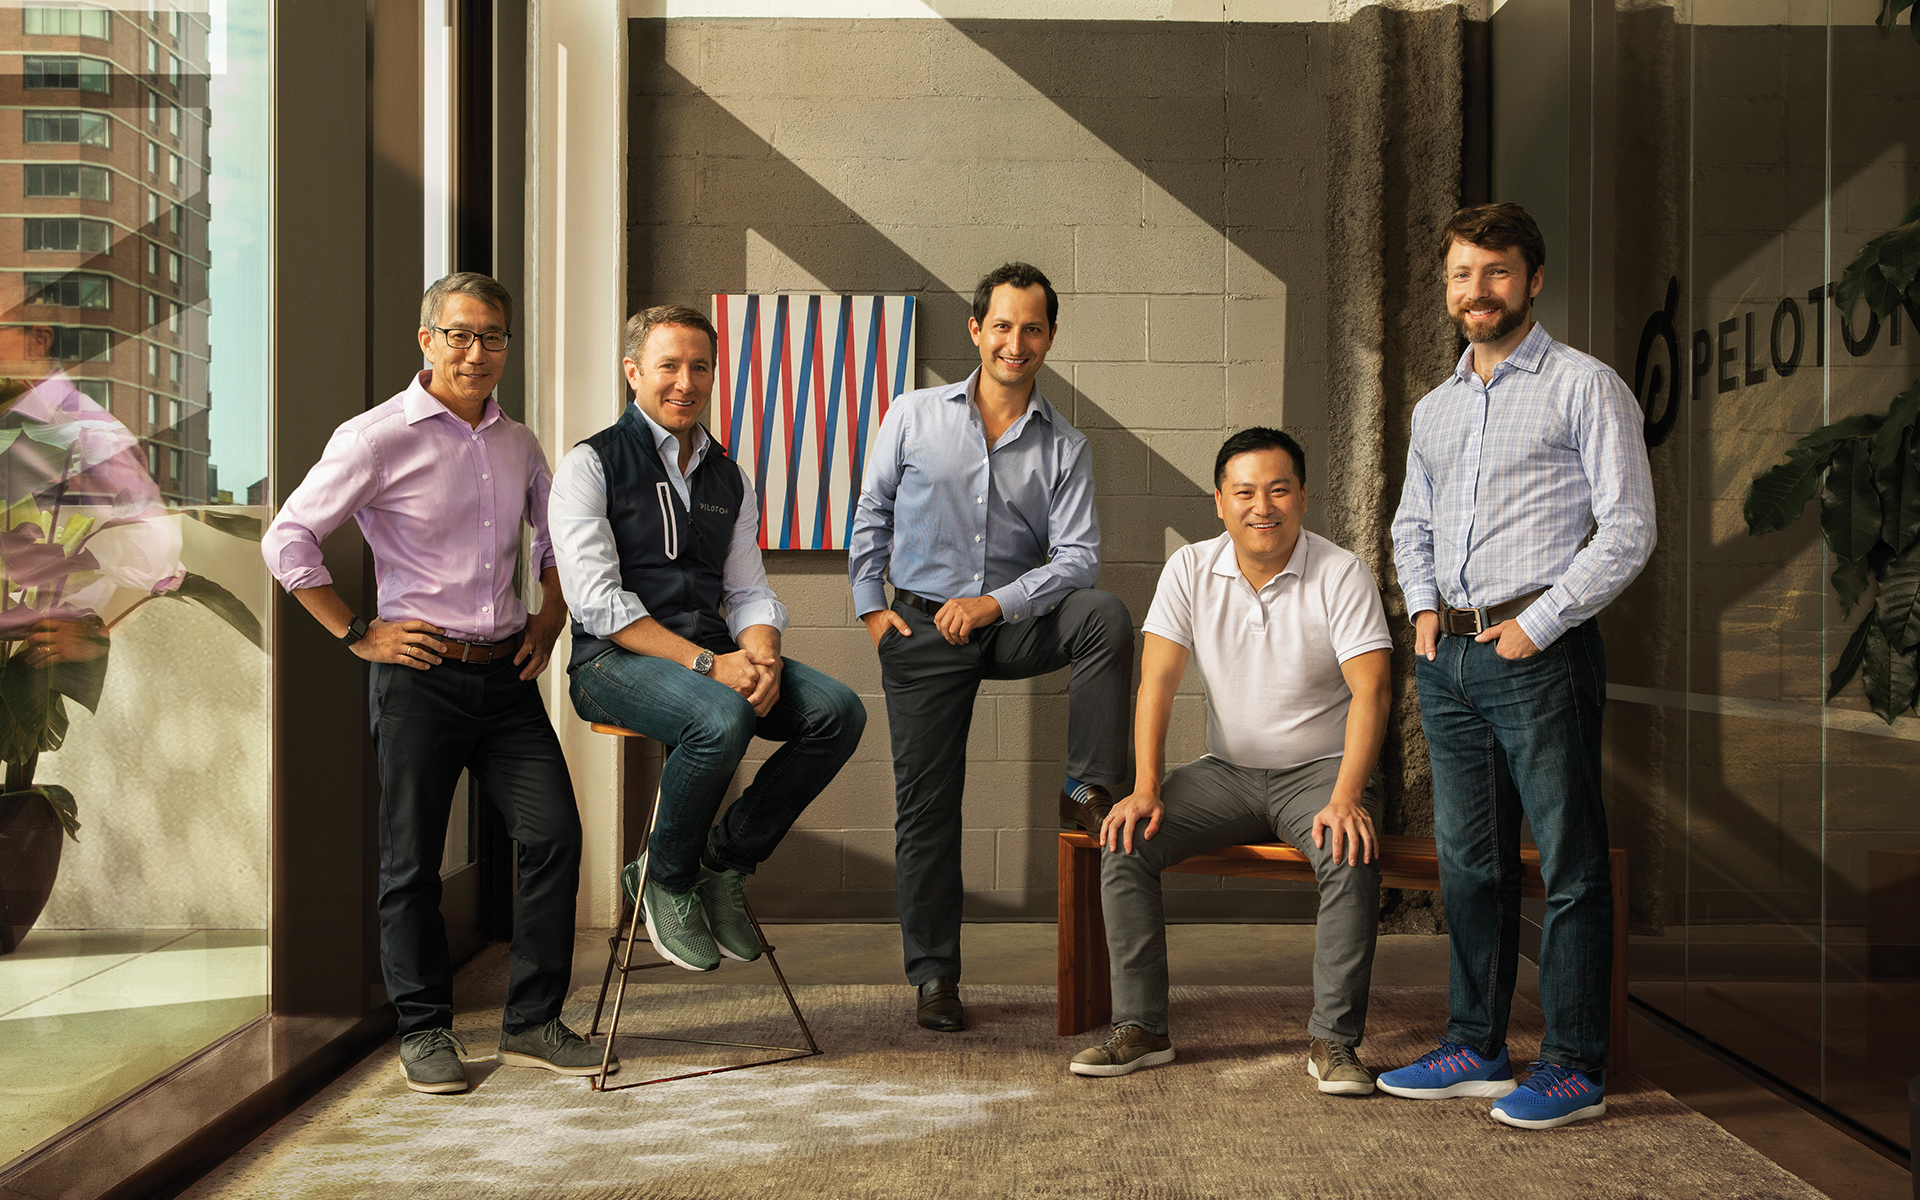 The team that started it all: Co-founders Hisao Kushi, CEO John Foley, COO Tom Cortese, CTO and CIO Yony Feng, and SVP Graham Stanton.